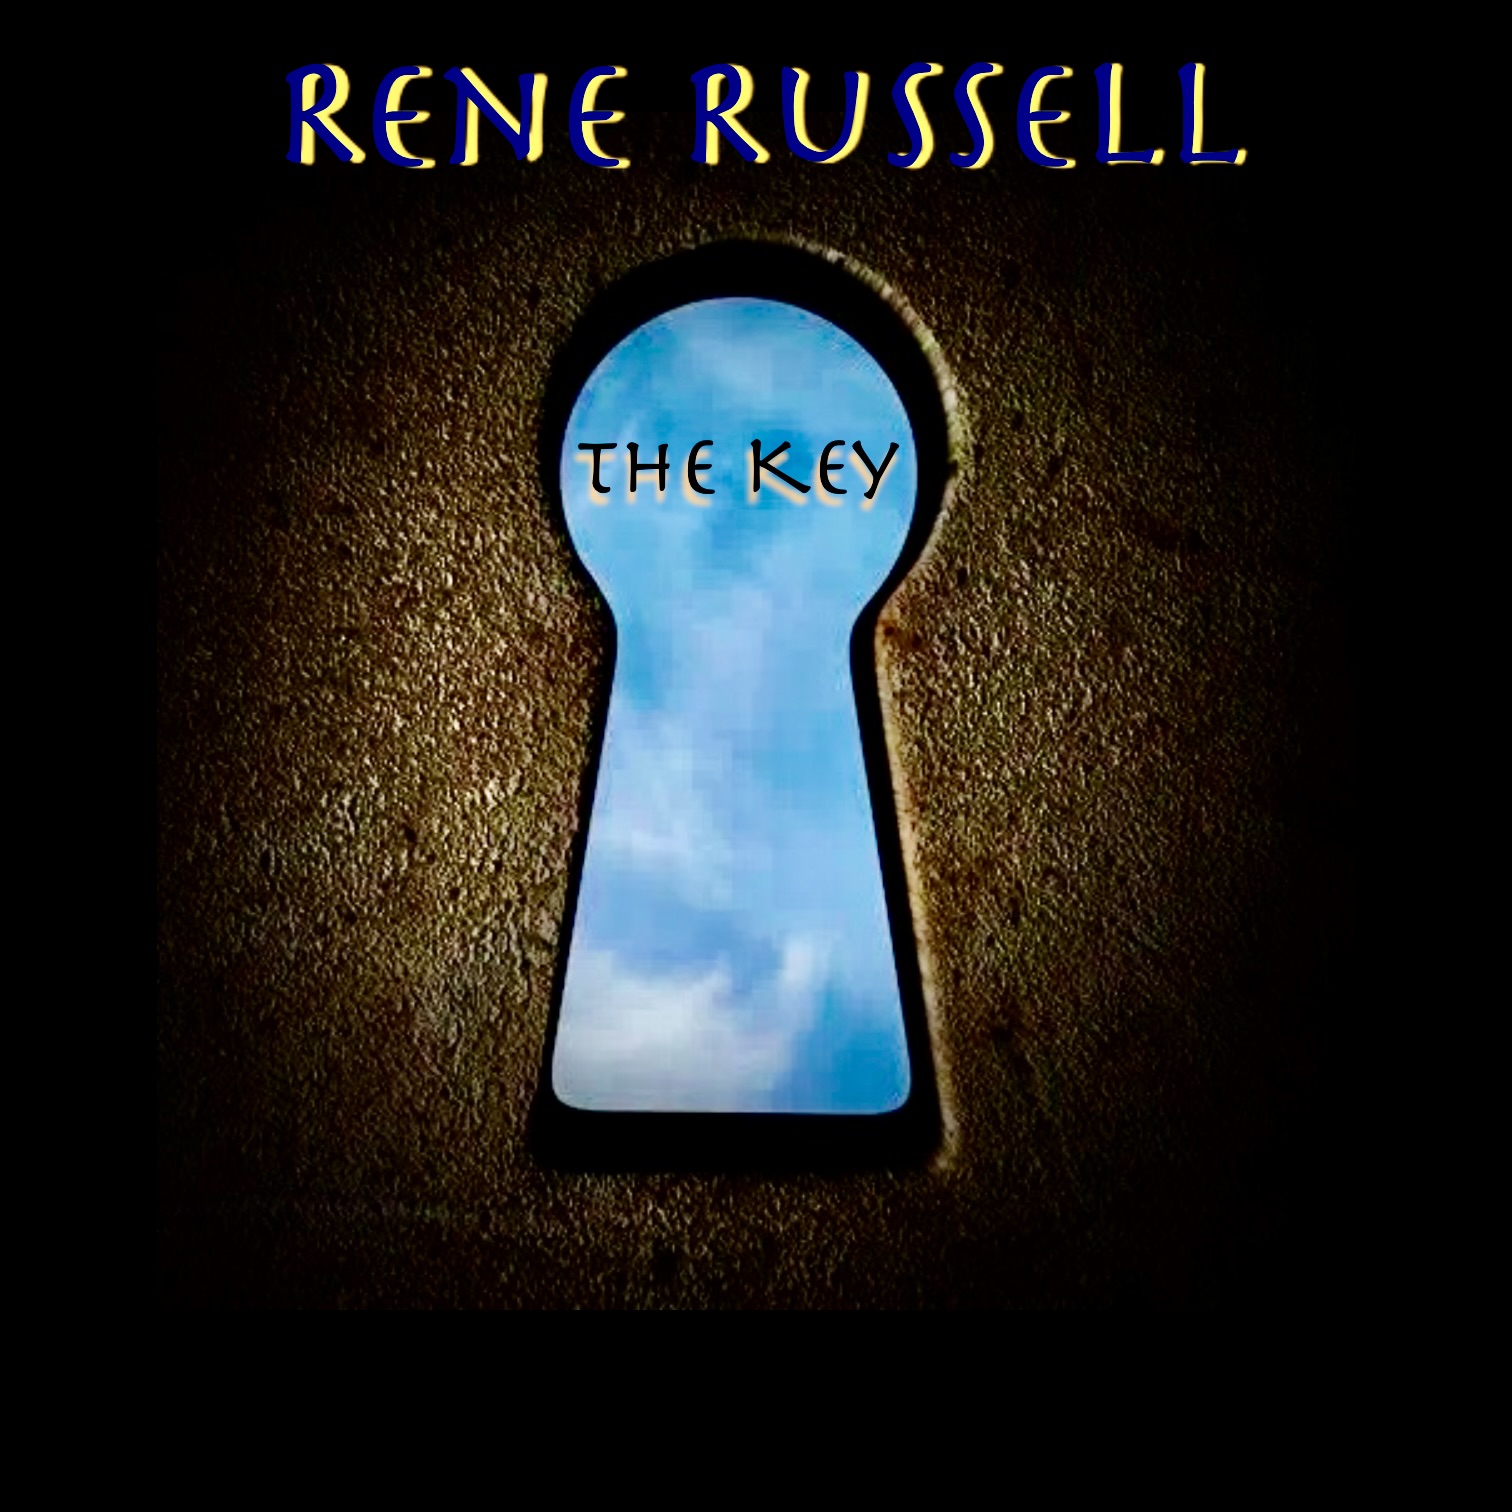 Rene Russell – “The Key”